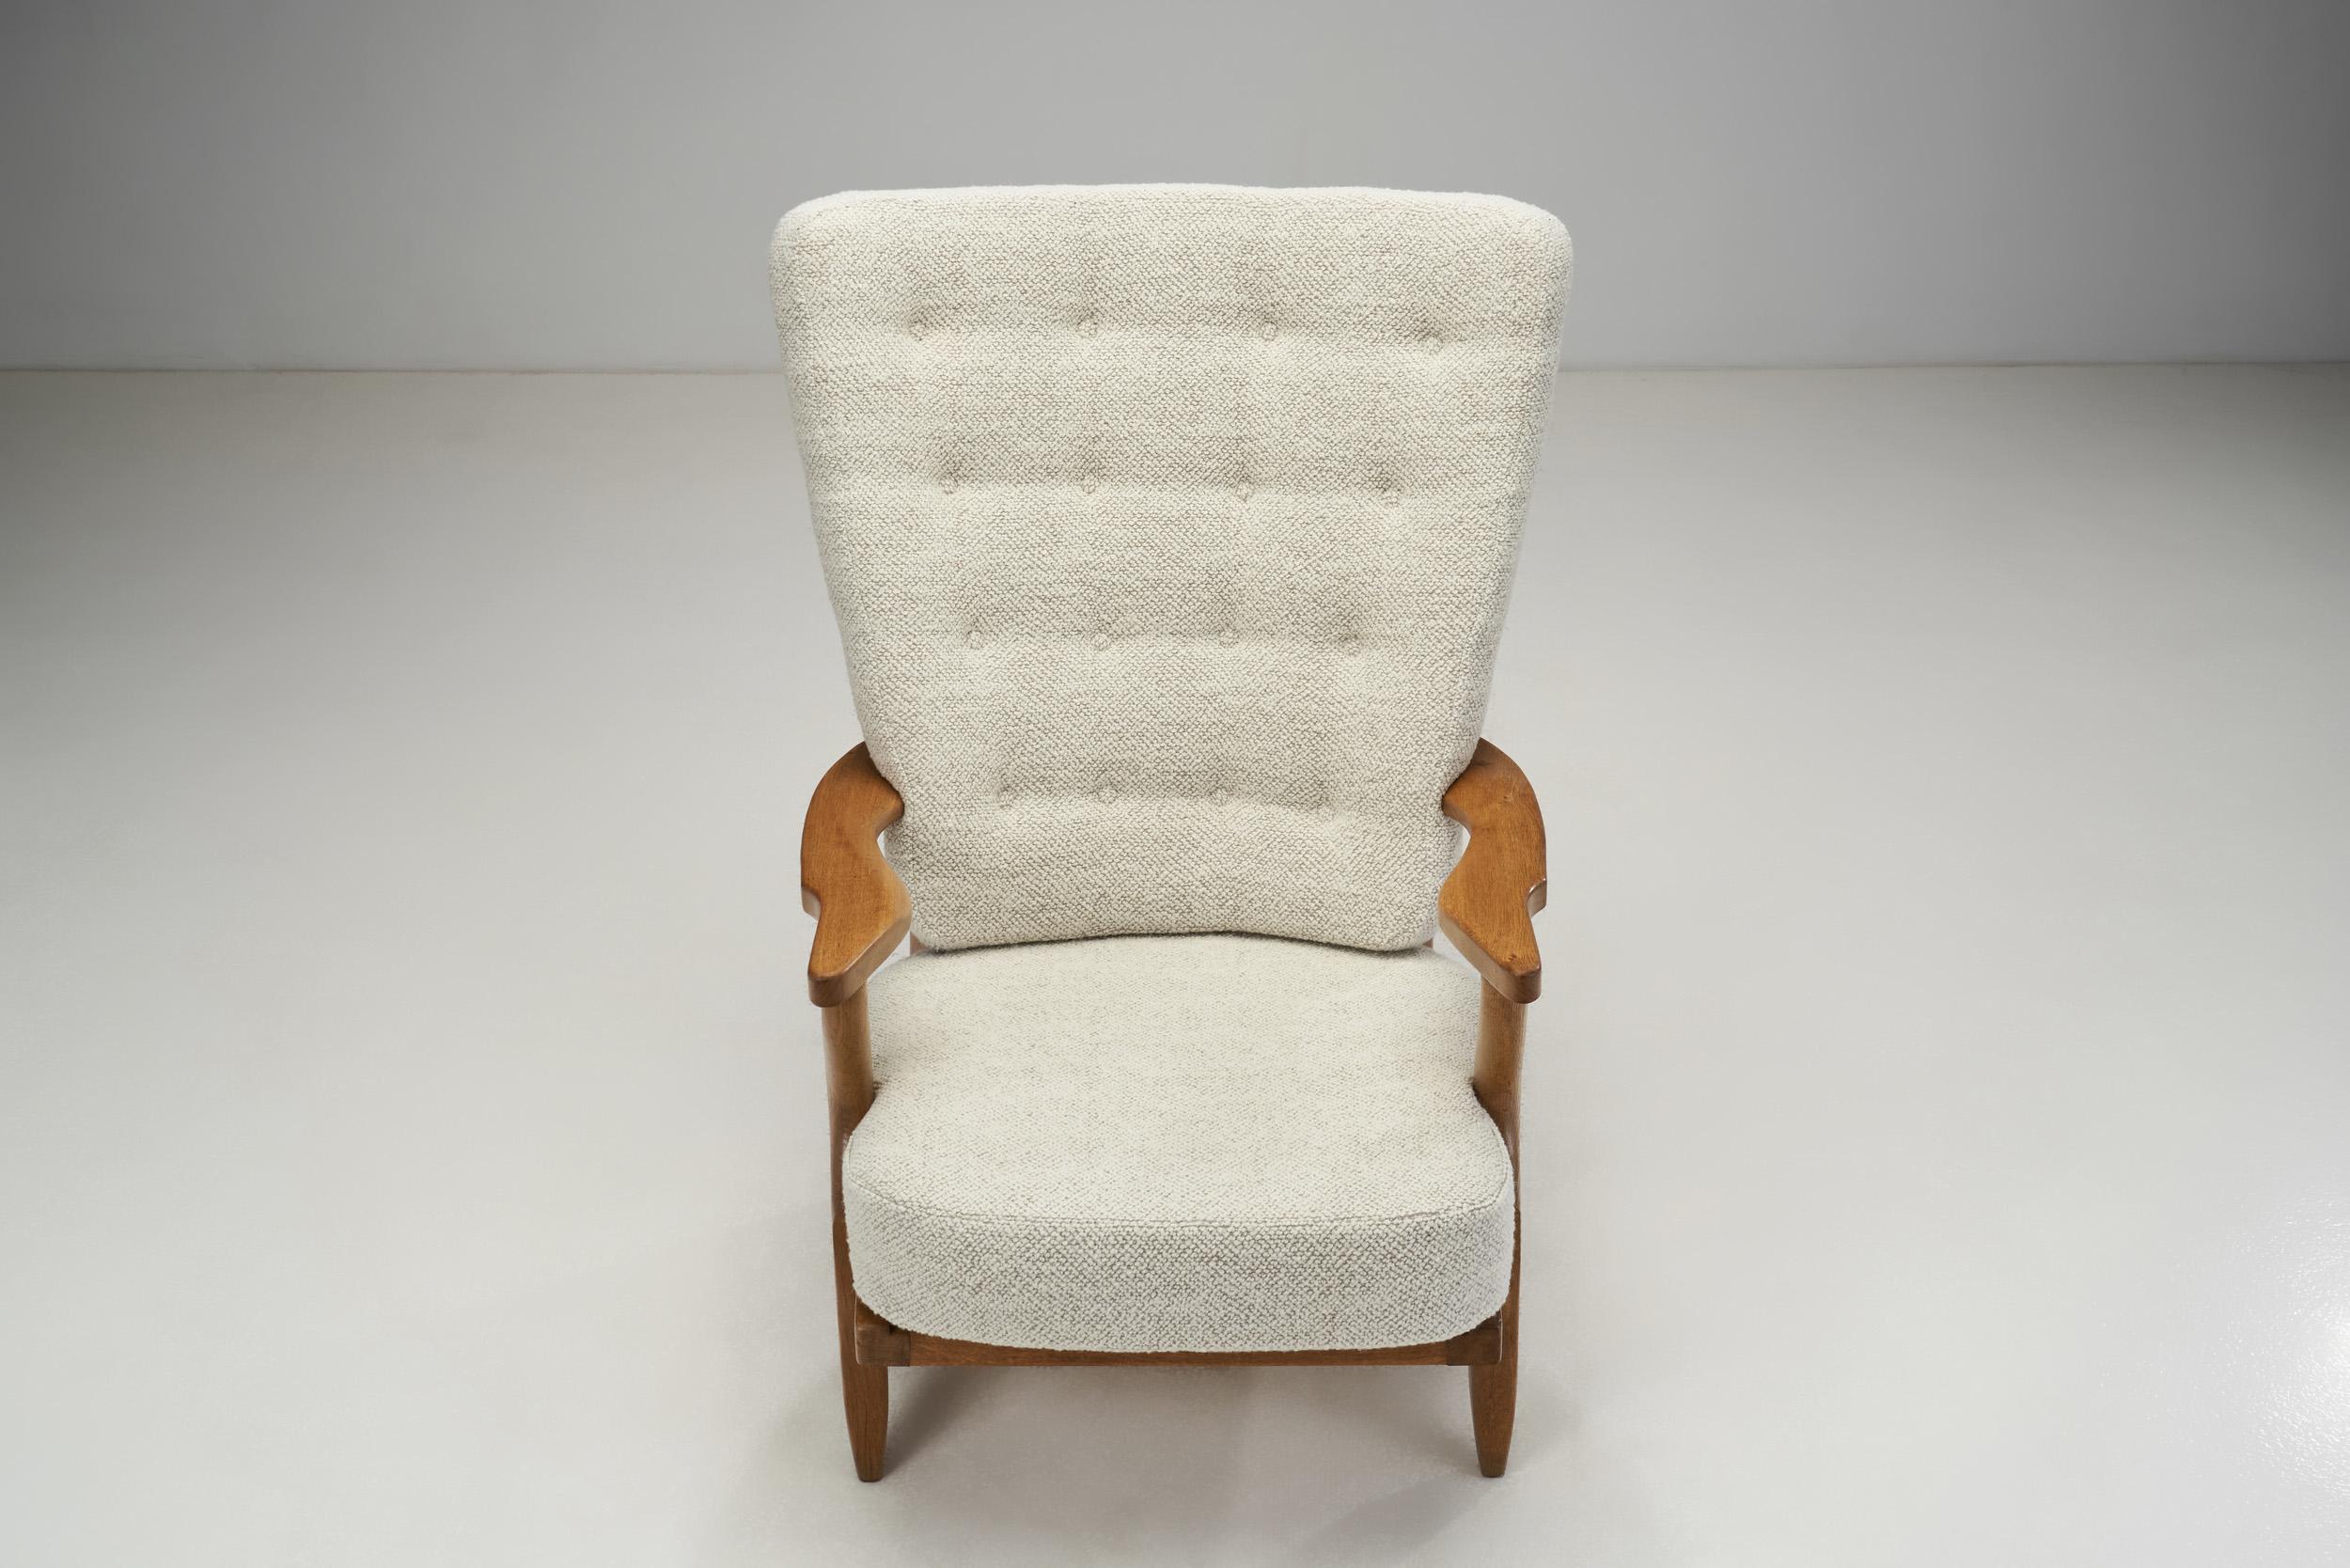 Mid-20th Century “Grand Repos” Chair by Guillerme et Chambron for Votre Maison, France 1950s For Sale